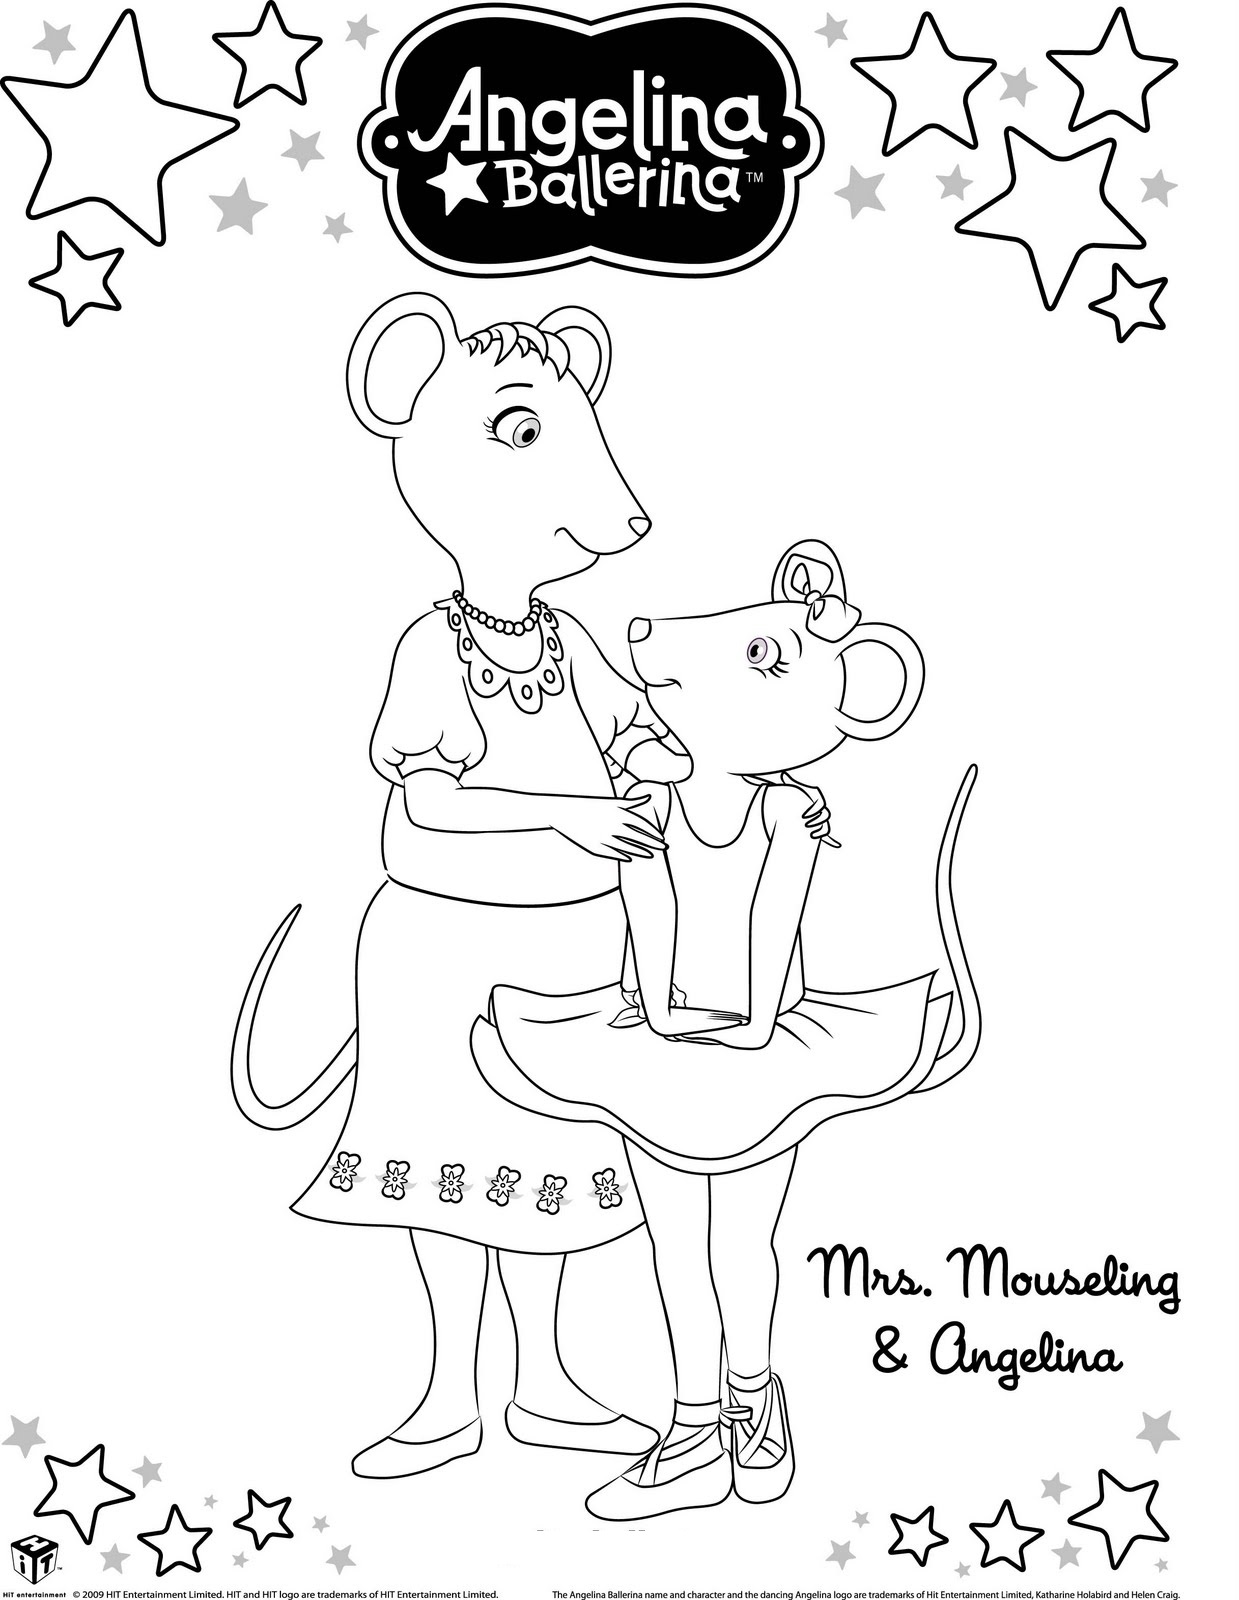 Printable Angelina Ballerina Coloring Pages Pdf - Free Printable ngelina Ballerina Coloring Pages